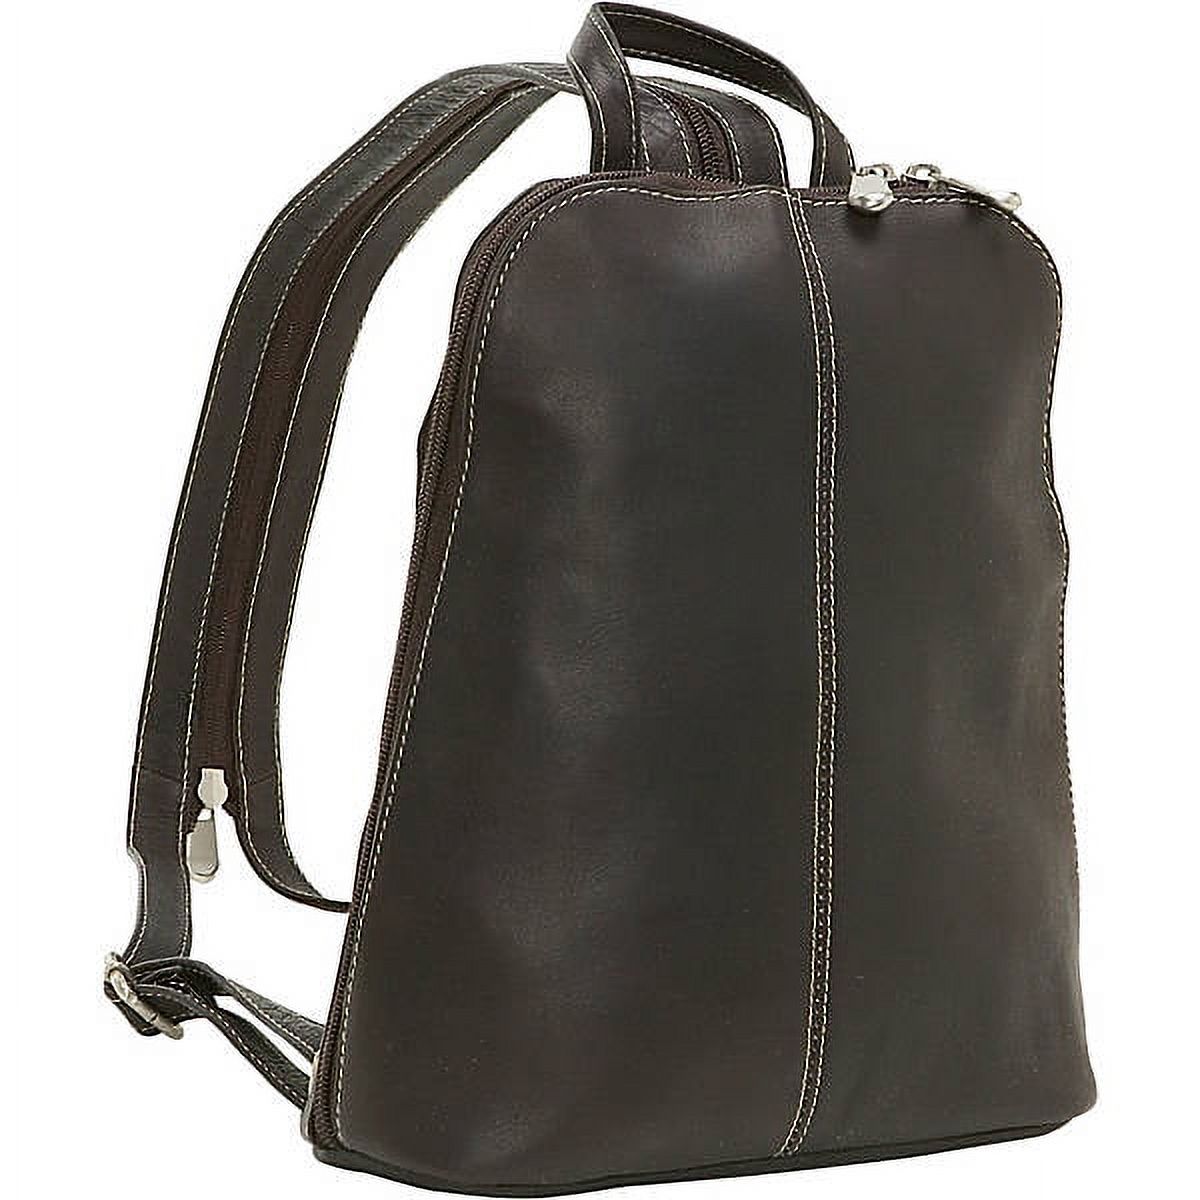 Le Donne Leather U Zip Womans Sling/Backpack LD-1500 - image 1 of 6